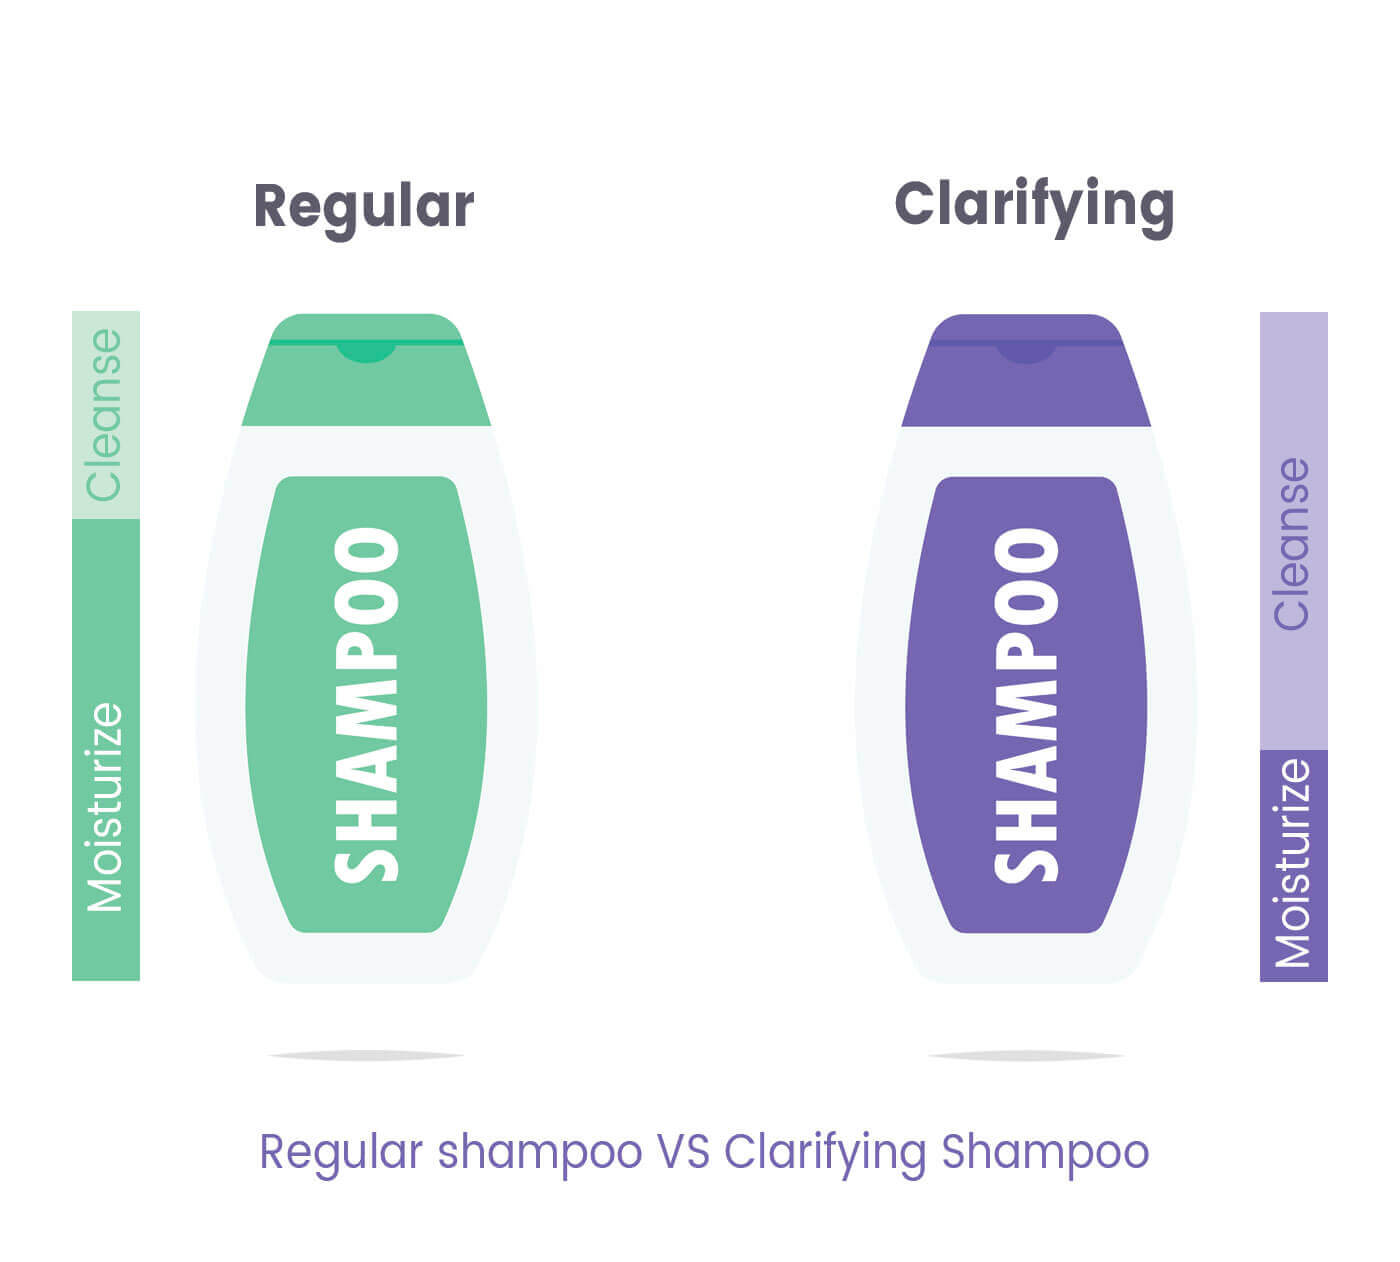 Clarifying Shampoo: How Often Should You Use It For Healthy Hair?